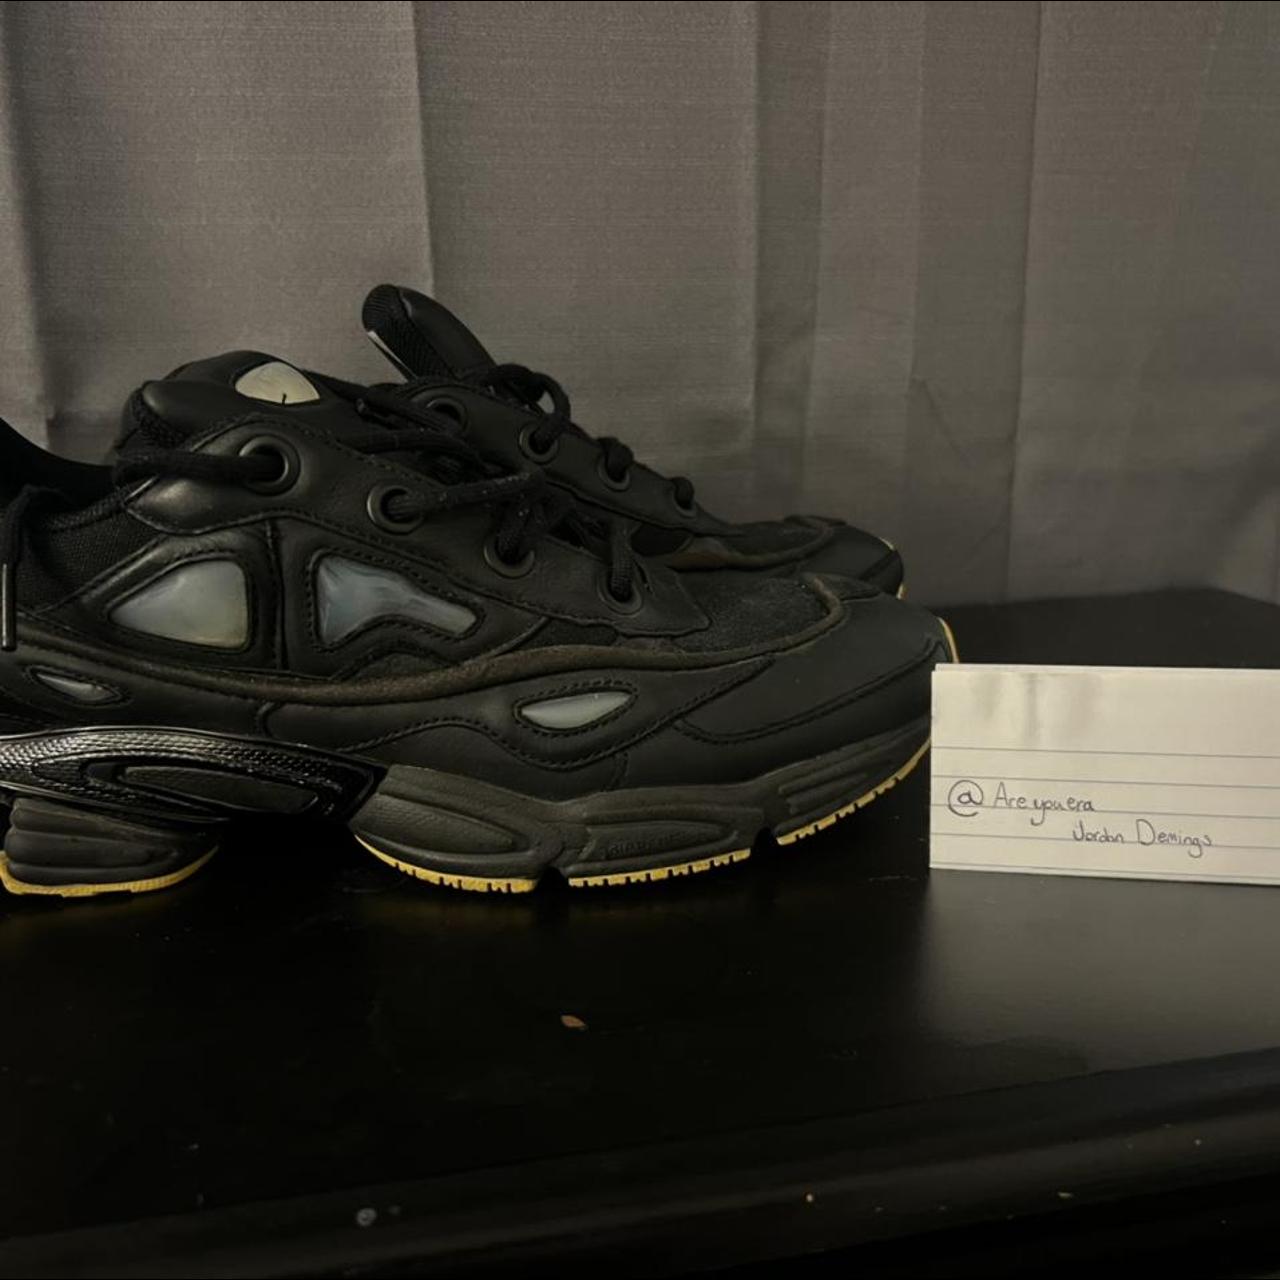 Raf Simons Men's Black and Yellow Trainers | Depop